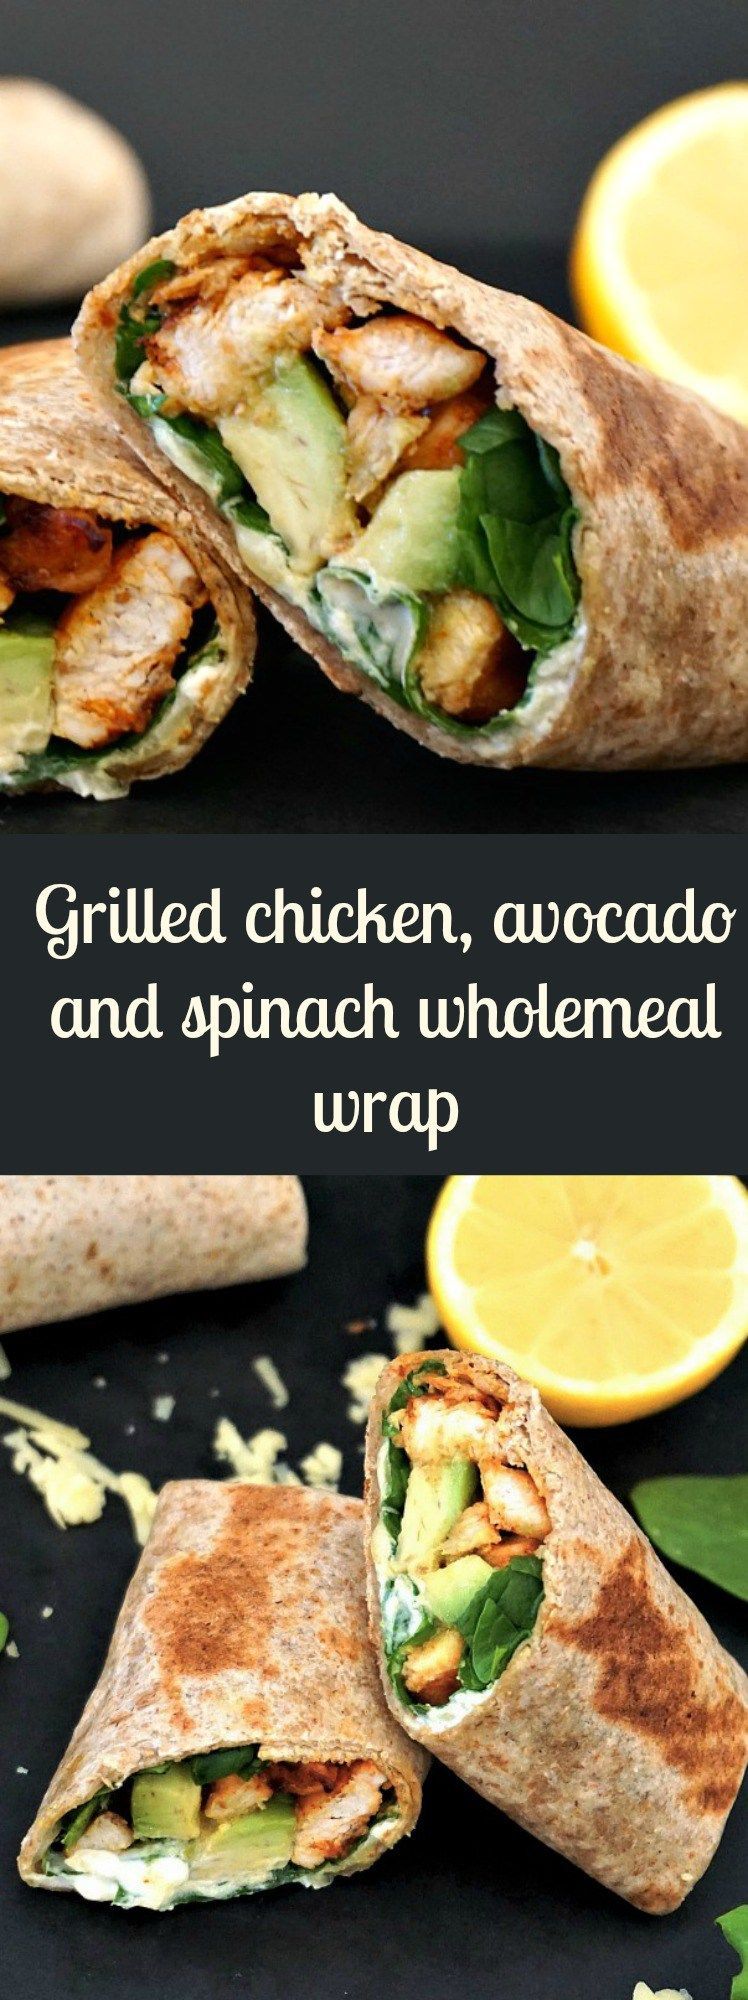 Grilled chicken, avocado and spinach wholemeal wrap, a healthy recipe when you are on the go or time is short for cooking